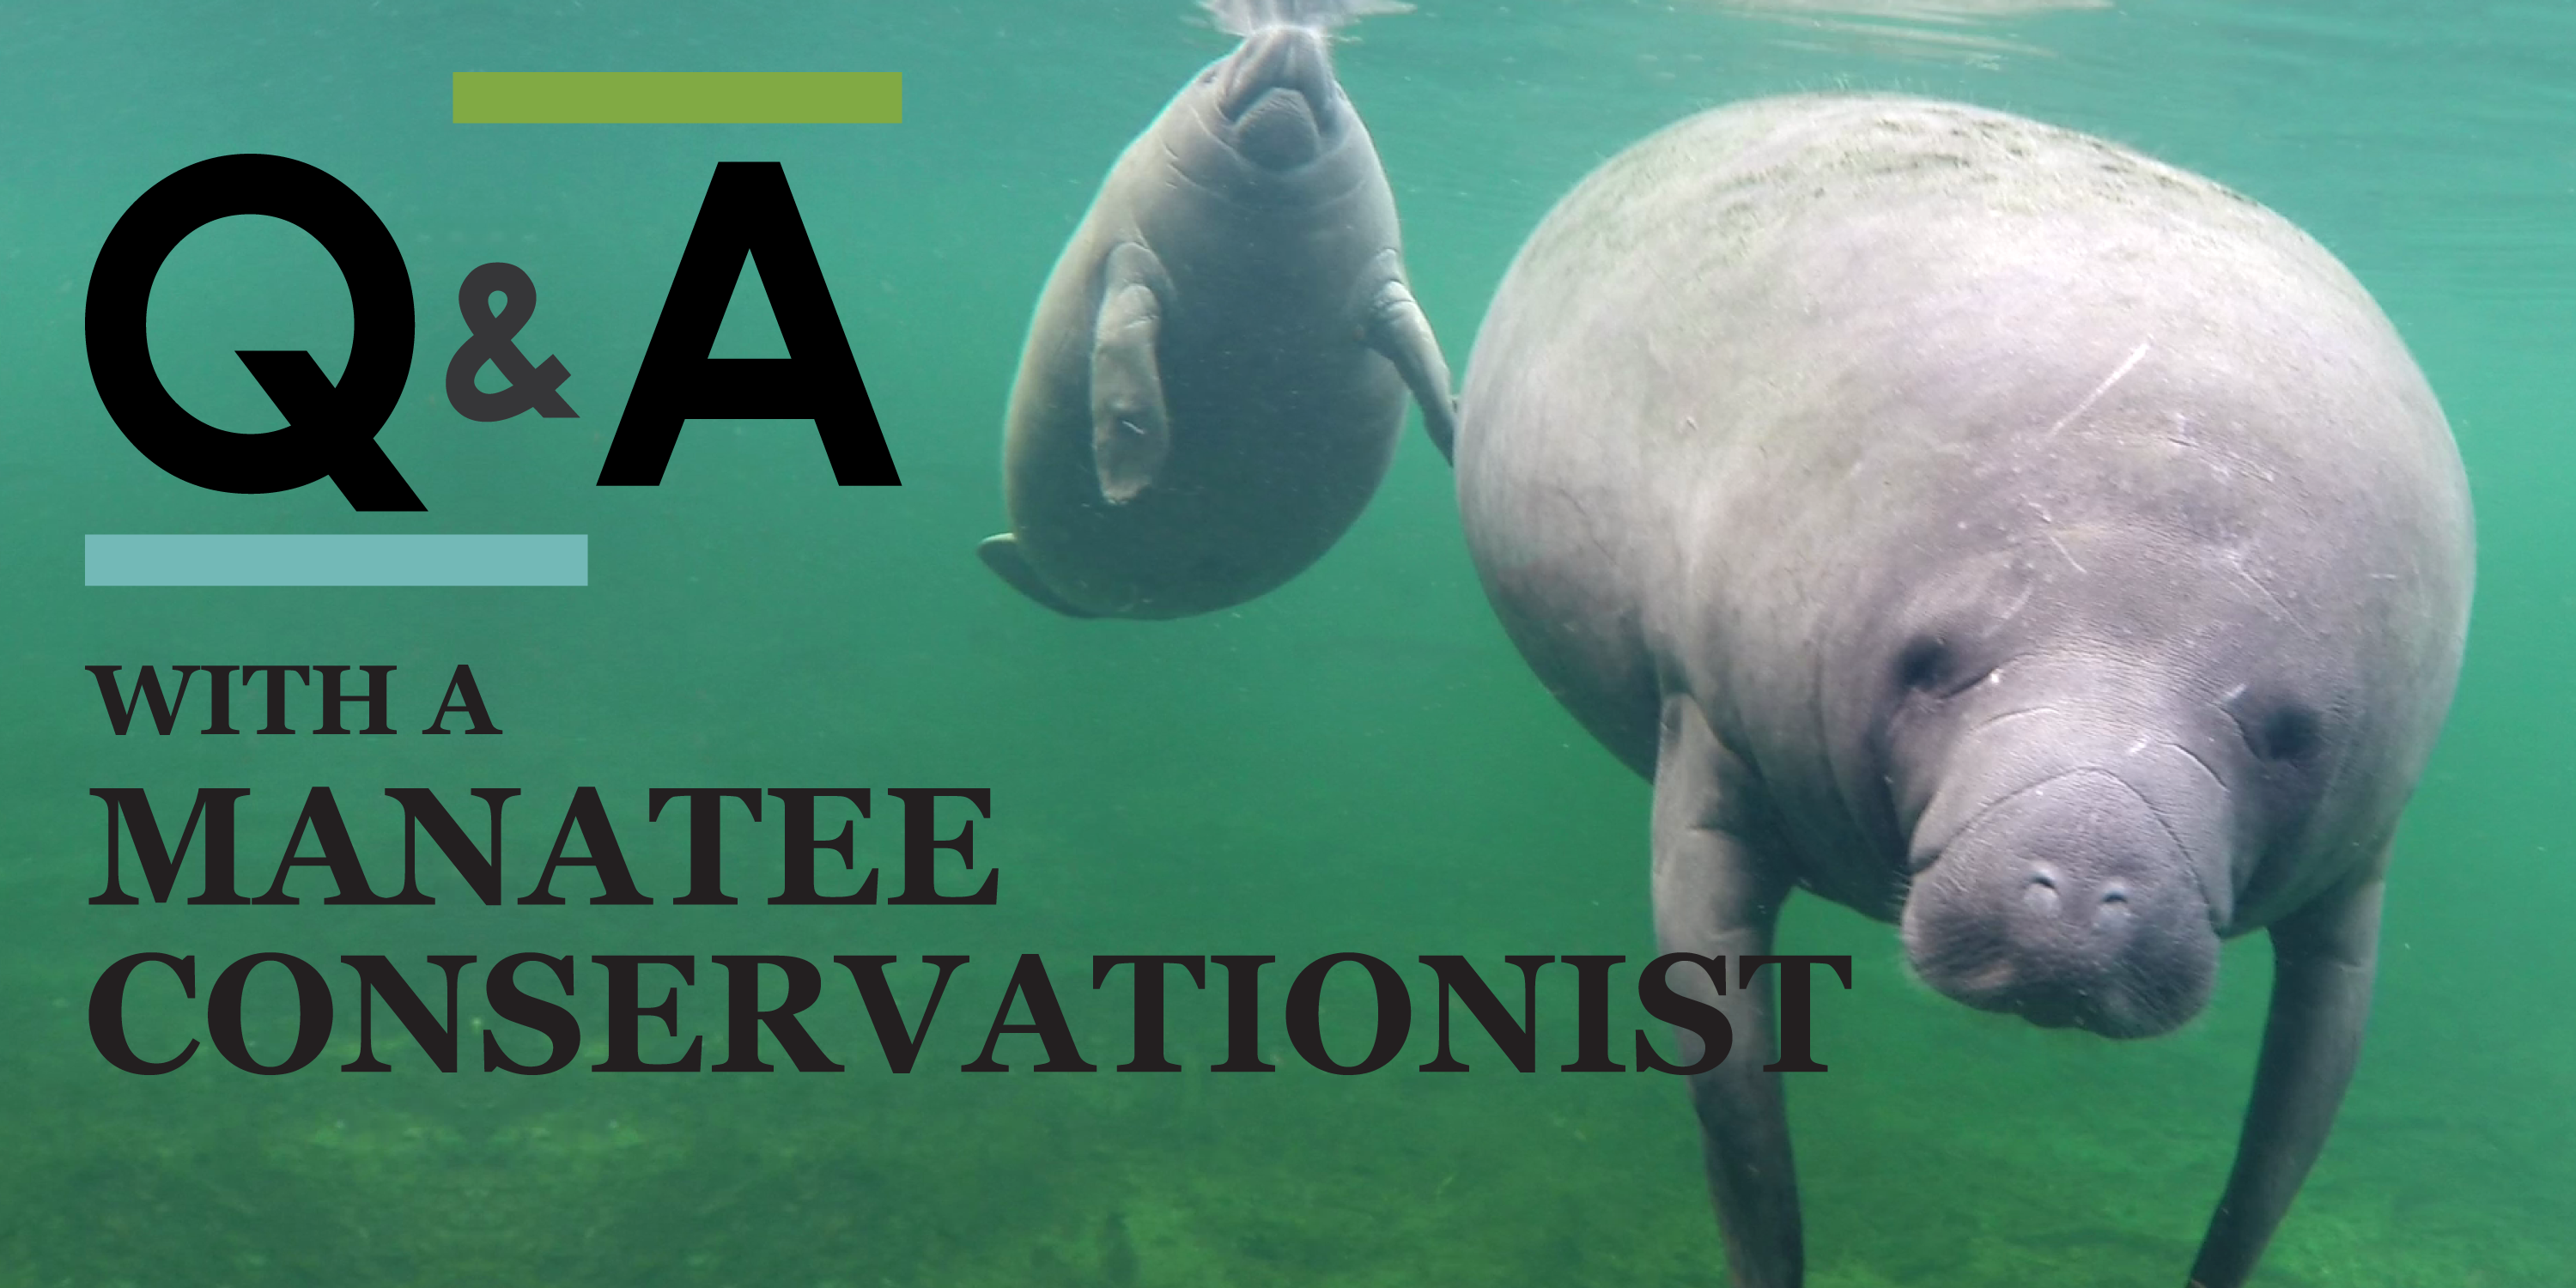 Q&A with a Manatee Conservationist